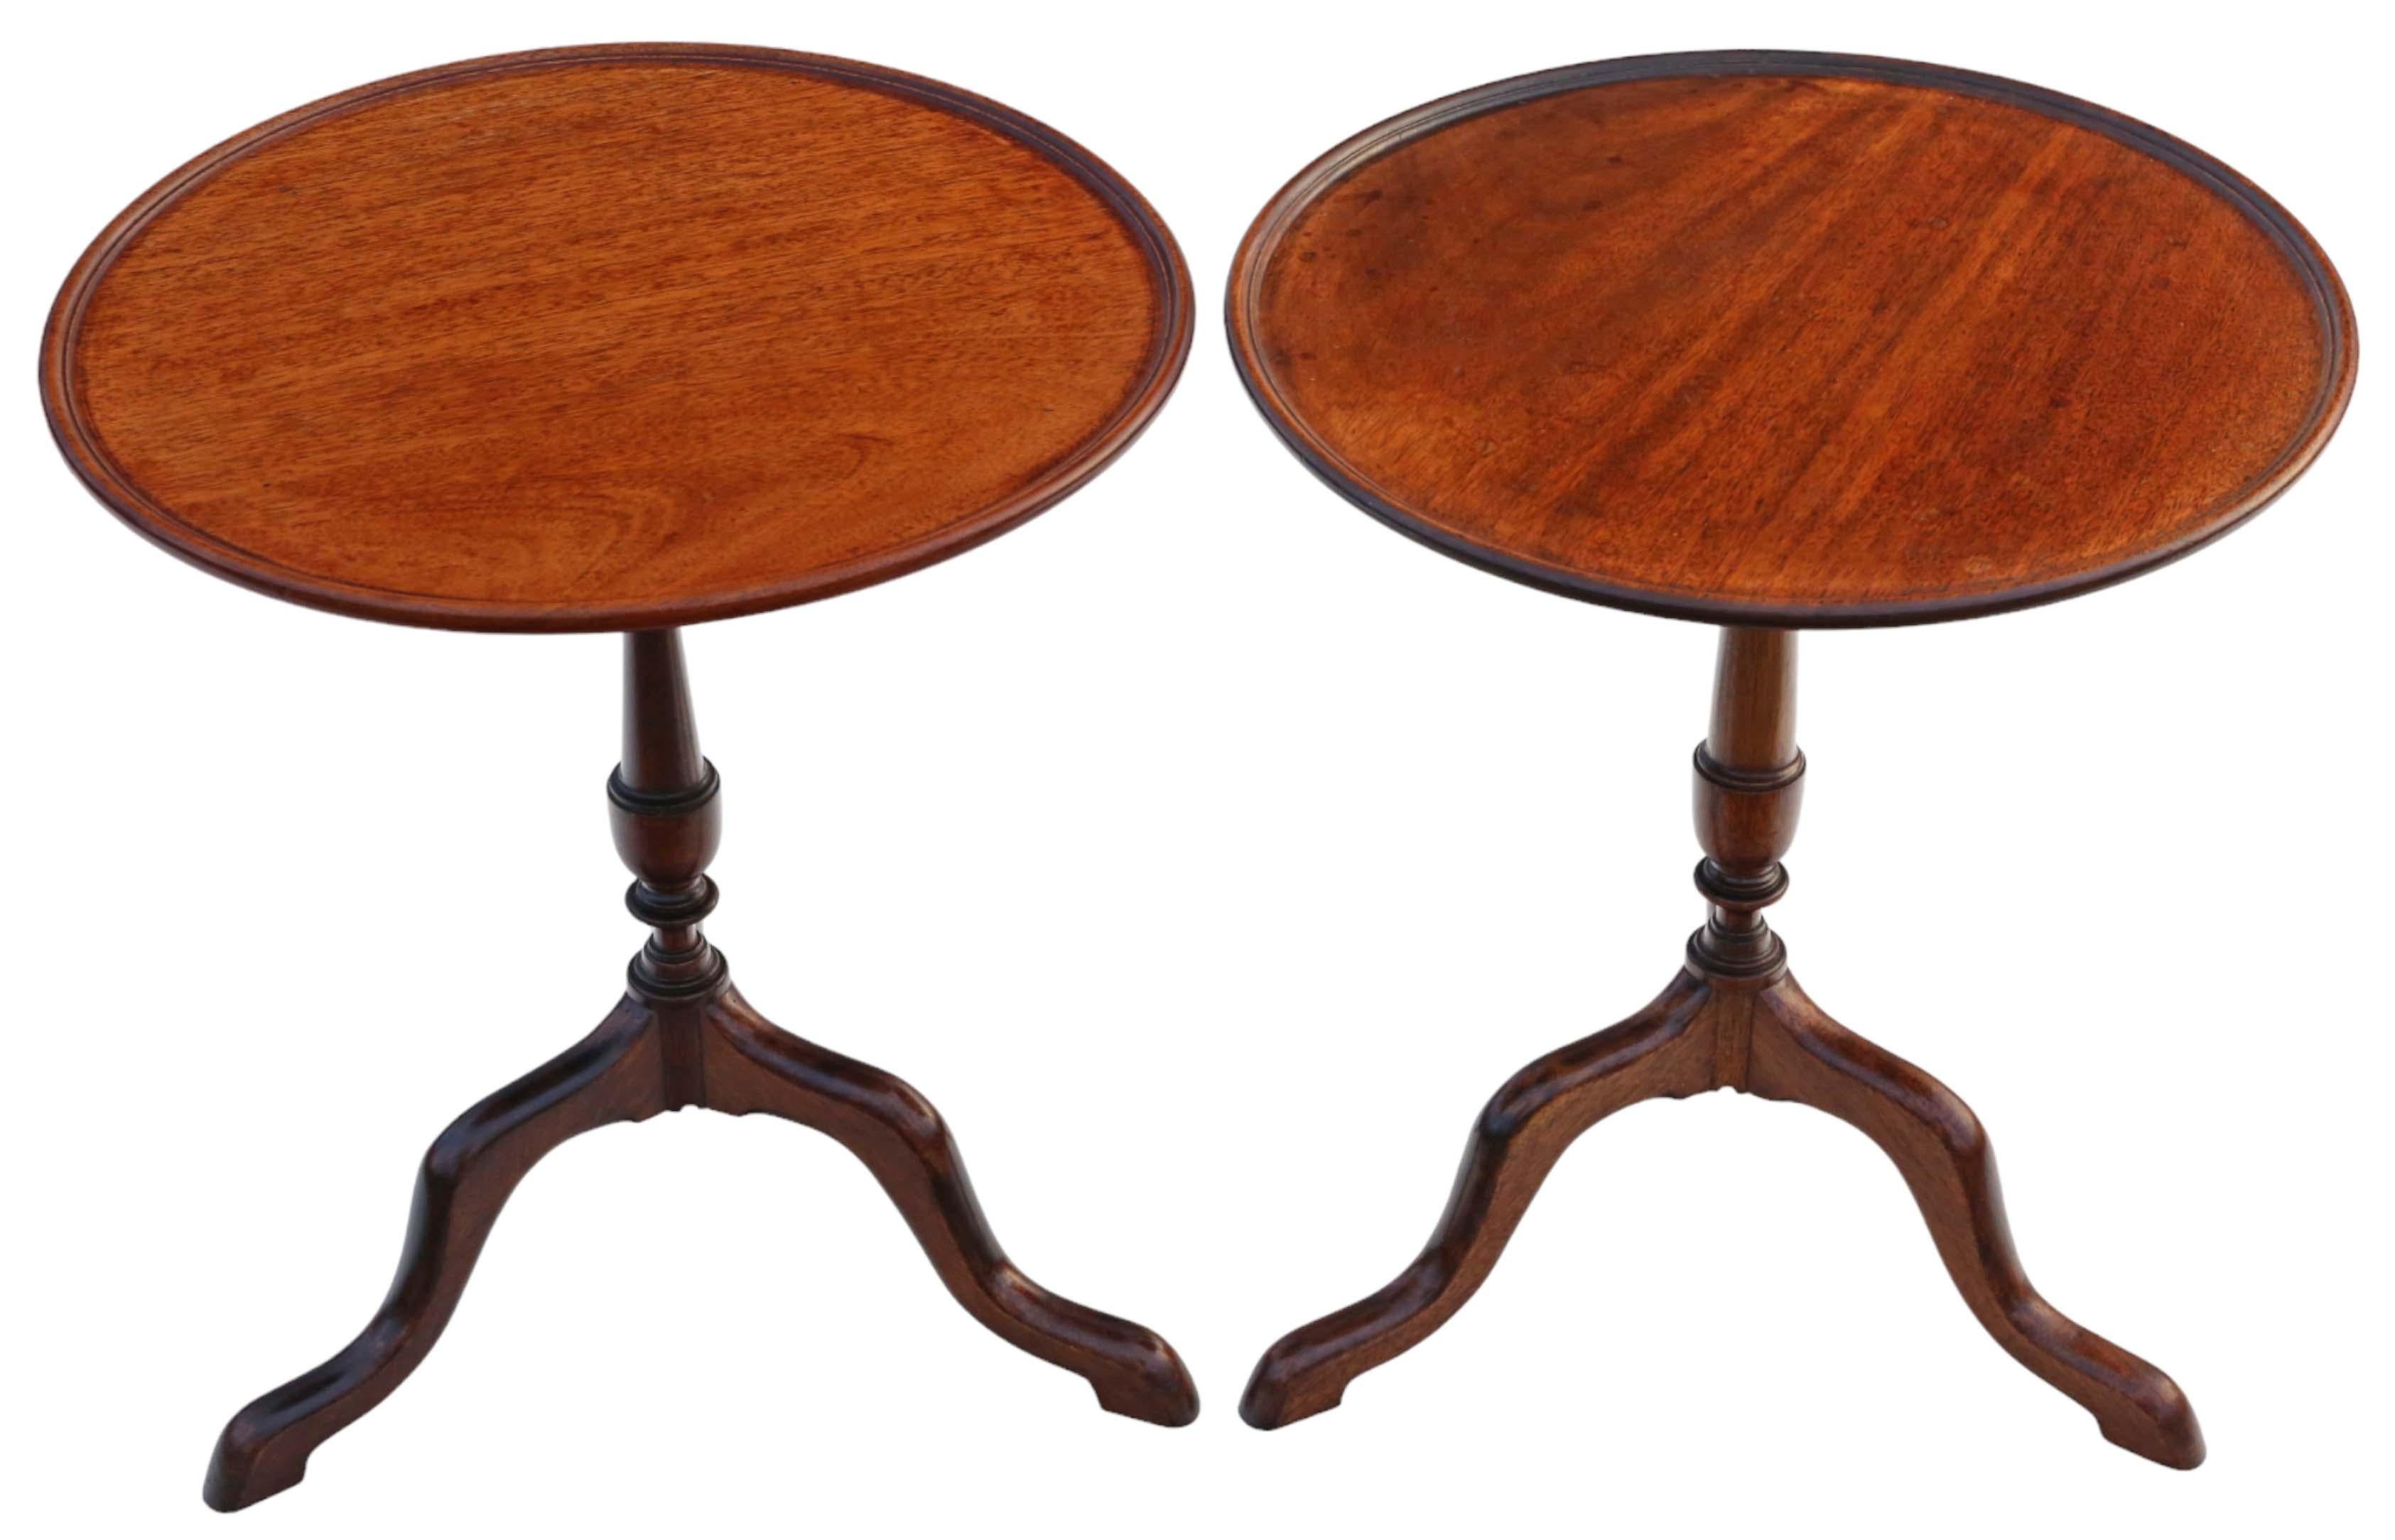 Pair of fine-quality 19th Century wine or side tables crafted from mahogany.

These tables are solid with no loose joints, presenting themselves as charming and very rare decorative finds.

There is no evidence of woodworm, and their aesthetic would